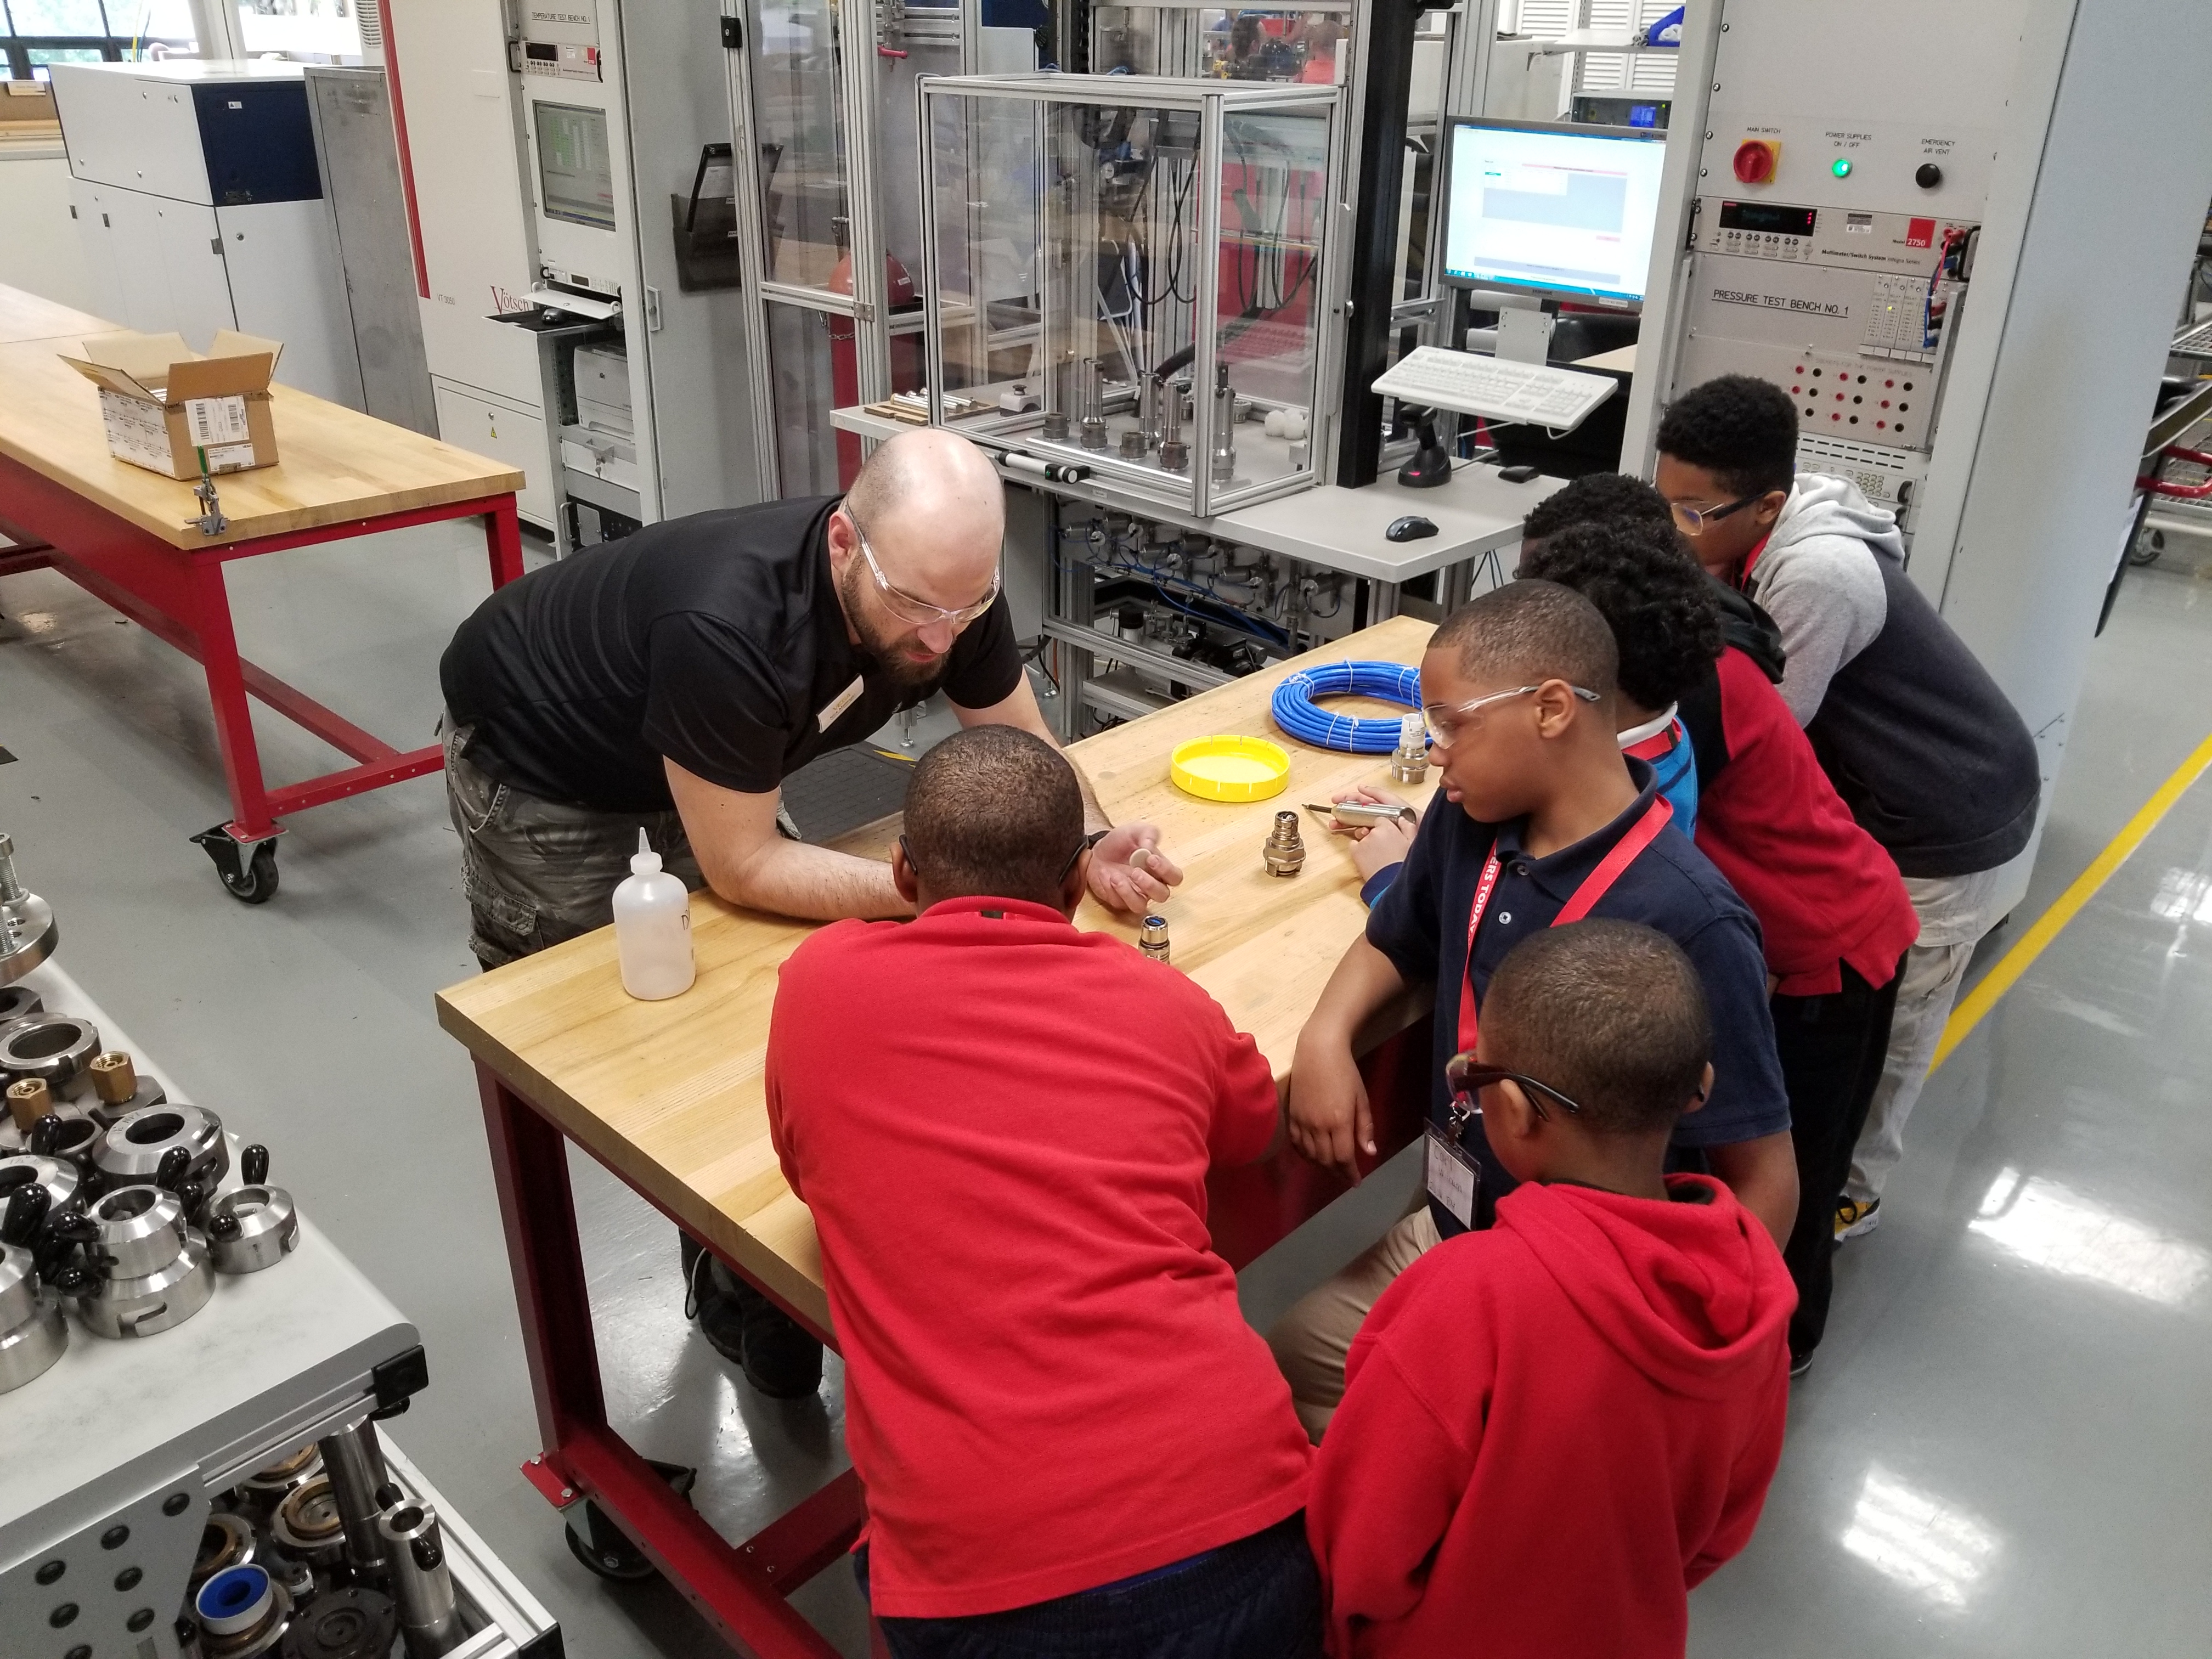 Students get hands-on experience with VEGA instrumentation